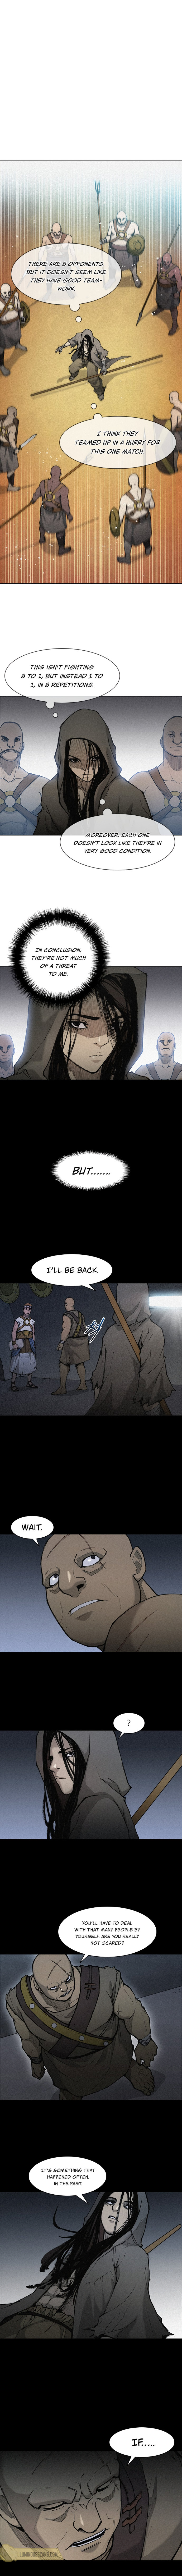 Long Way of the Warrior - Chapter 20 Page 3